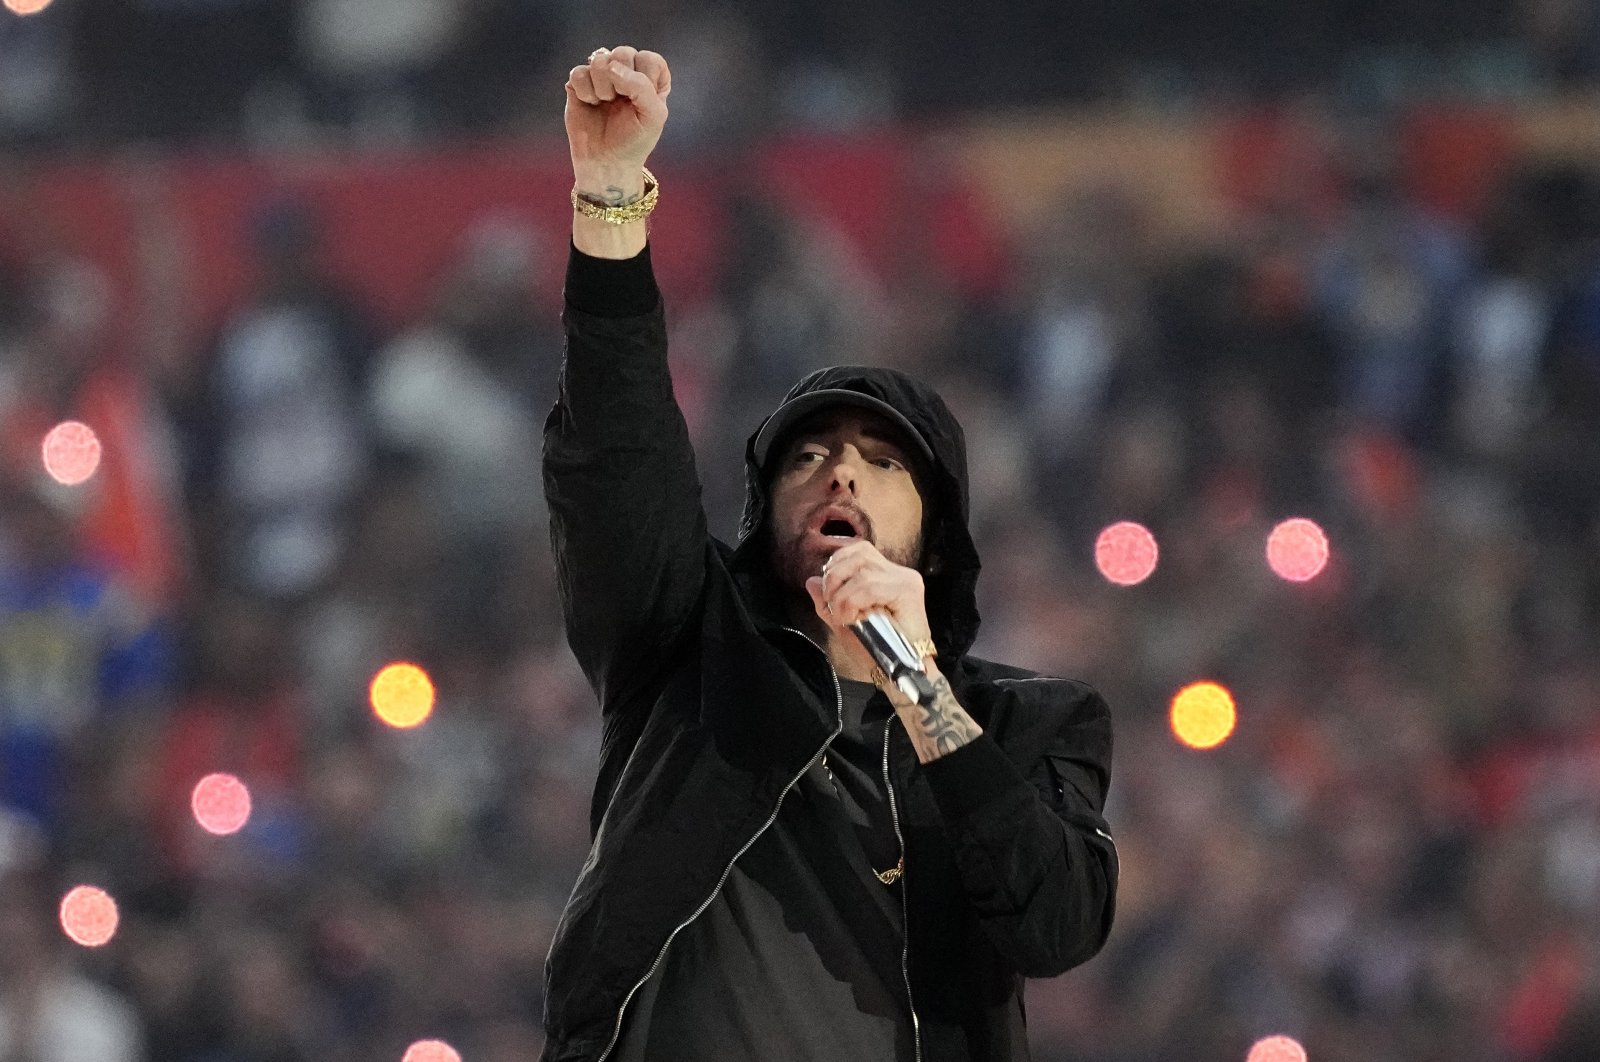 Eminem performs during halftime of the NFL Super Bowl 56 football game between the Los Angeles Rams and the Cincinnati Bengals, California, U.S., Feb. 13, 2022. (AP Photo)